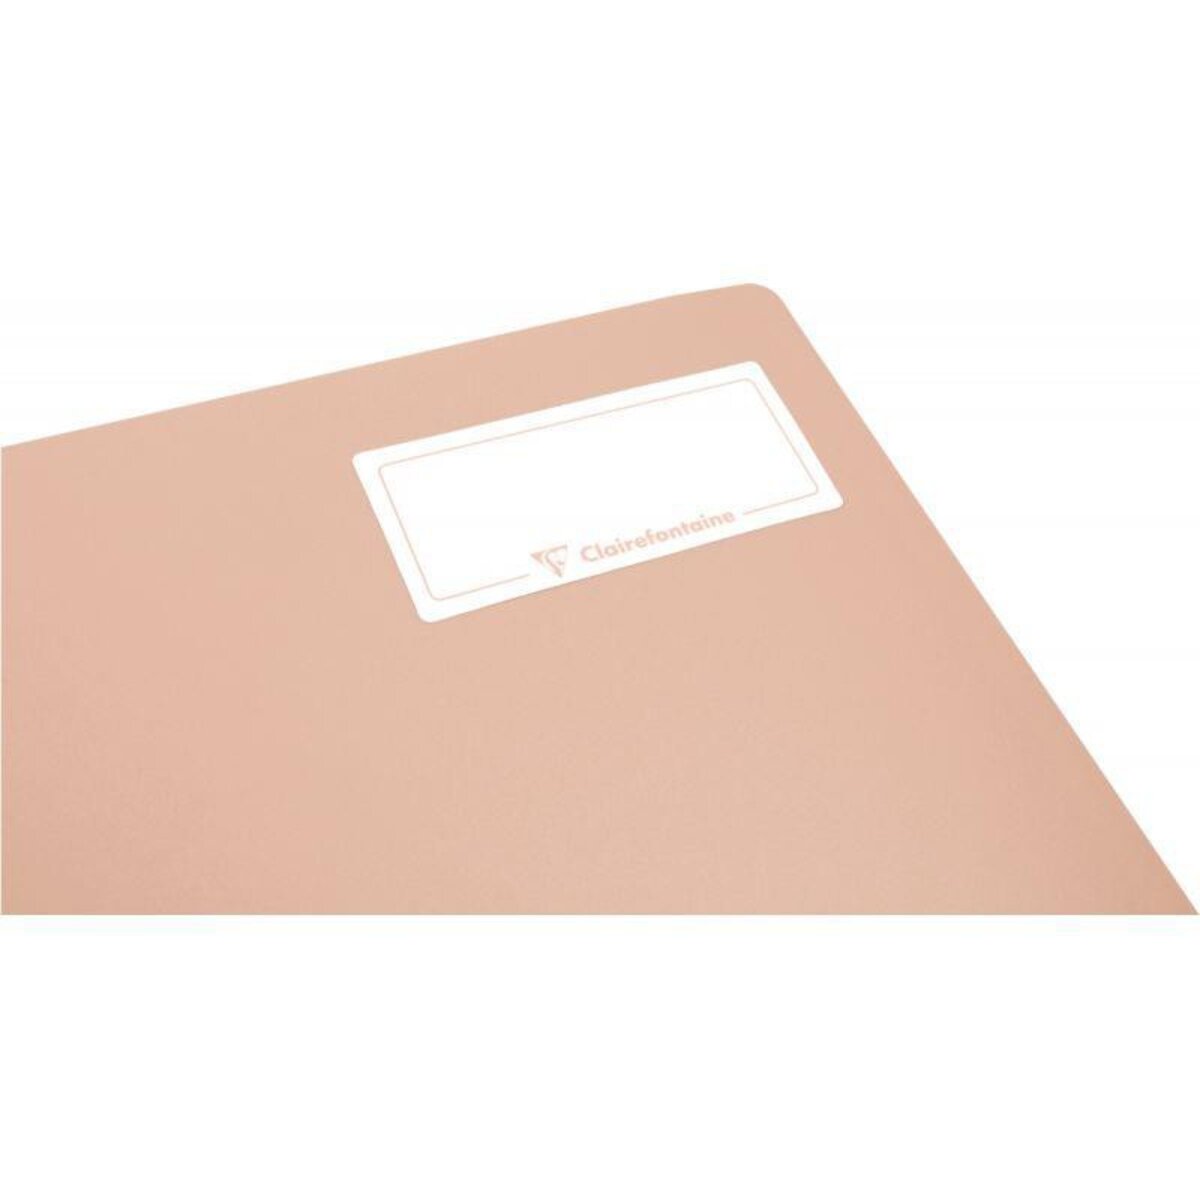 Cahier spirale Clairefontaine Koverbook Blush A5 14,8 x 21 cm